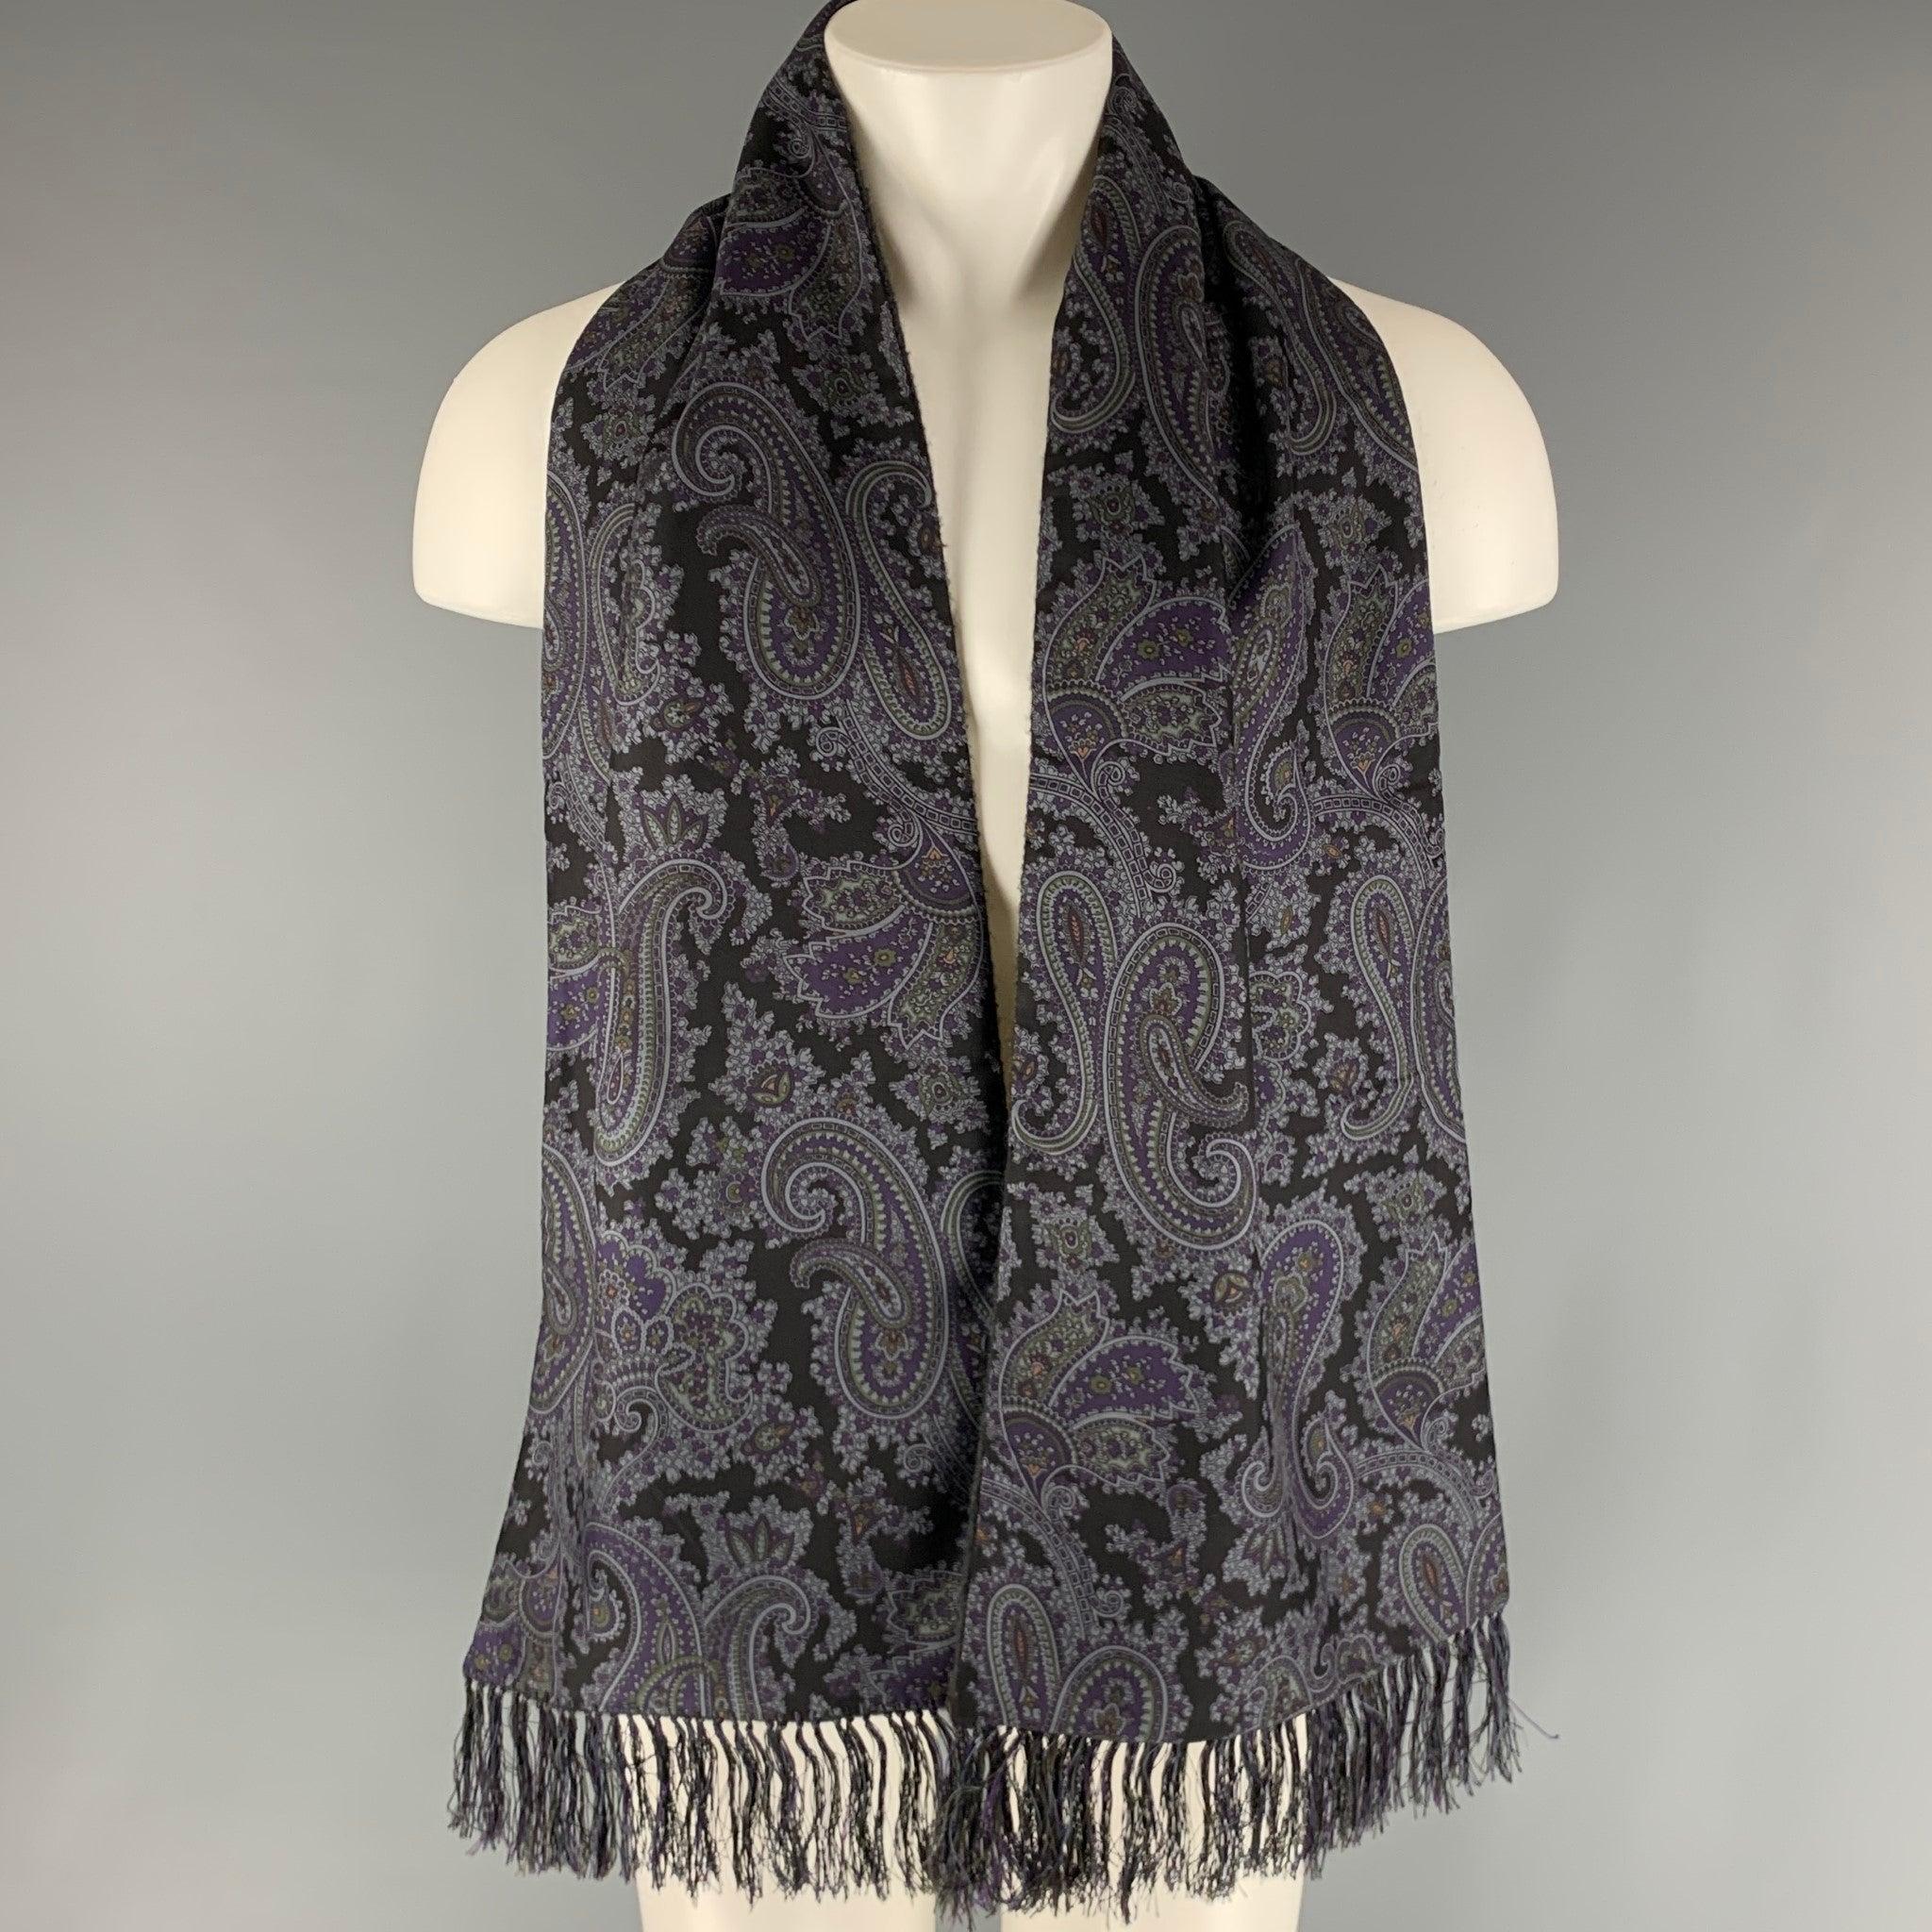 BERGDORF GOODMAN scarf comes in a black, grey and purple paisley cashmere and silk featuring a reversible design and a fringe trim. Made in at Britainches Excellent Pre-Owned Condition. 

Measurements: 
   68 inches  x 12 inches  
  
  
 
Reference: